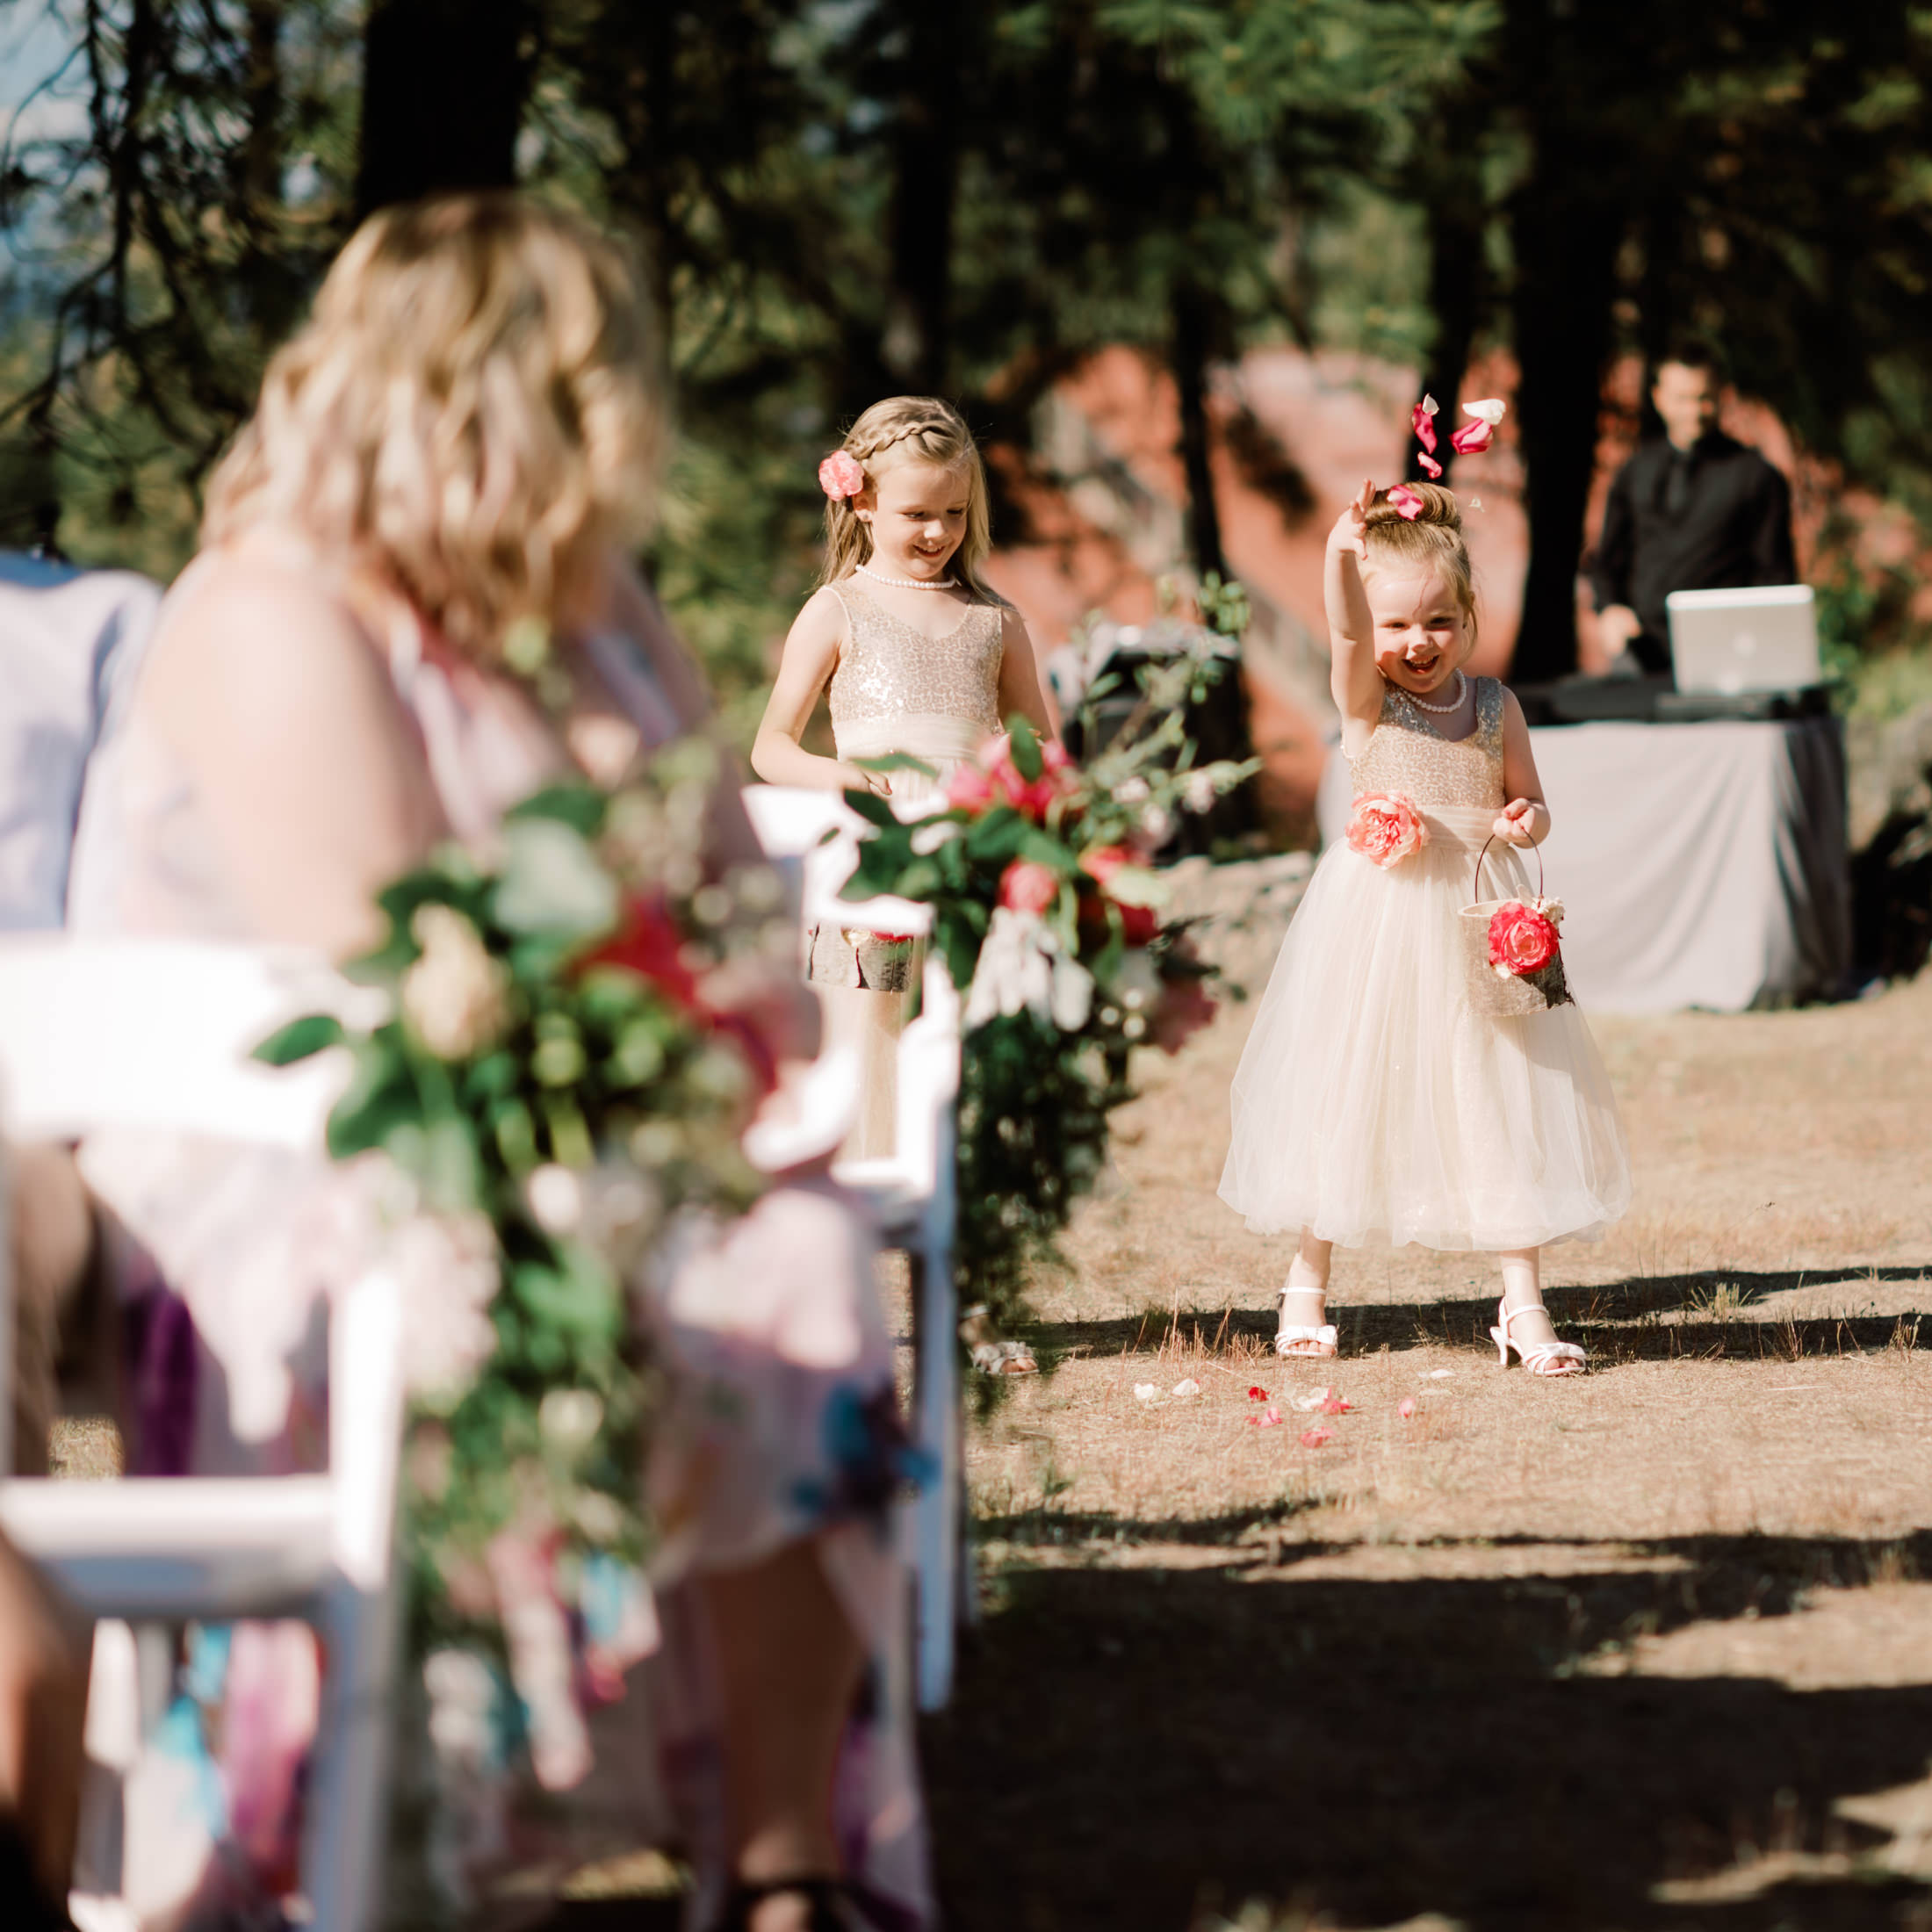 Sleeping Lady Resort weddings: Flower girls tossing petals at the processional